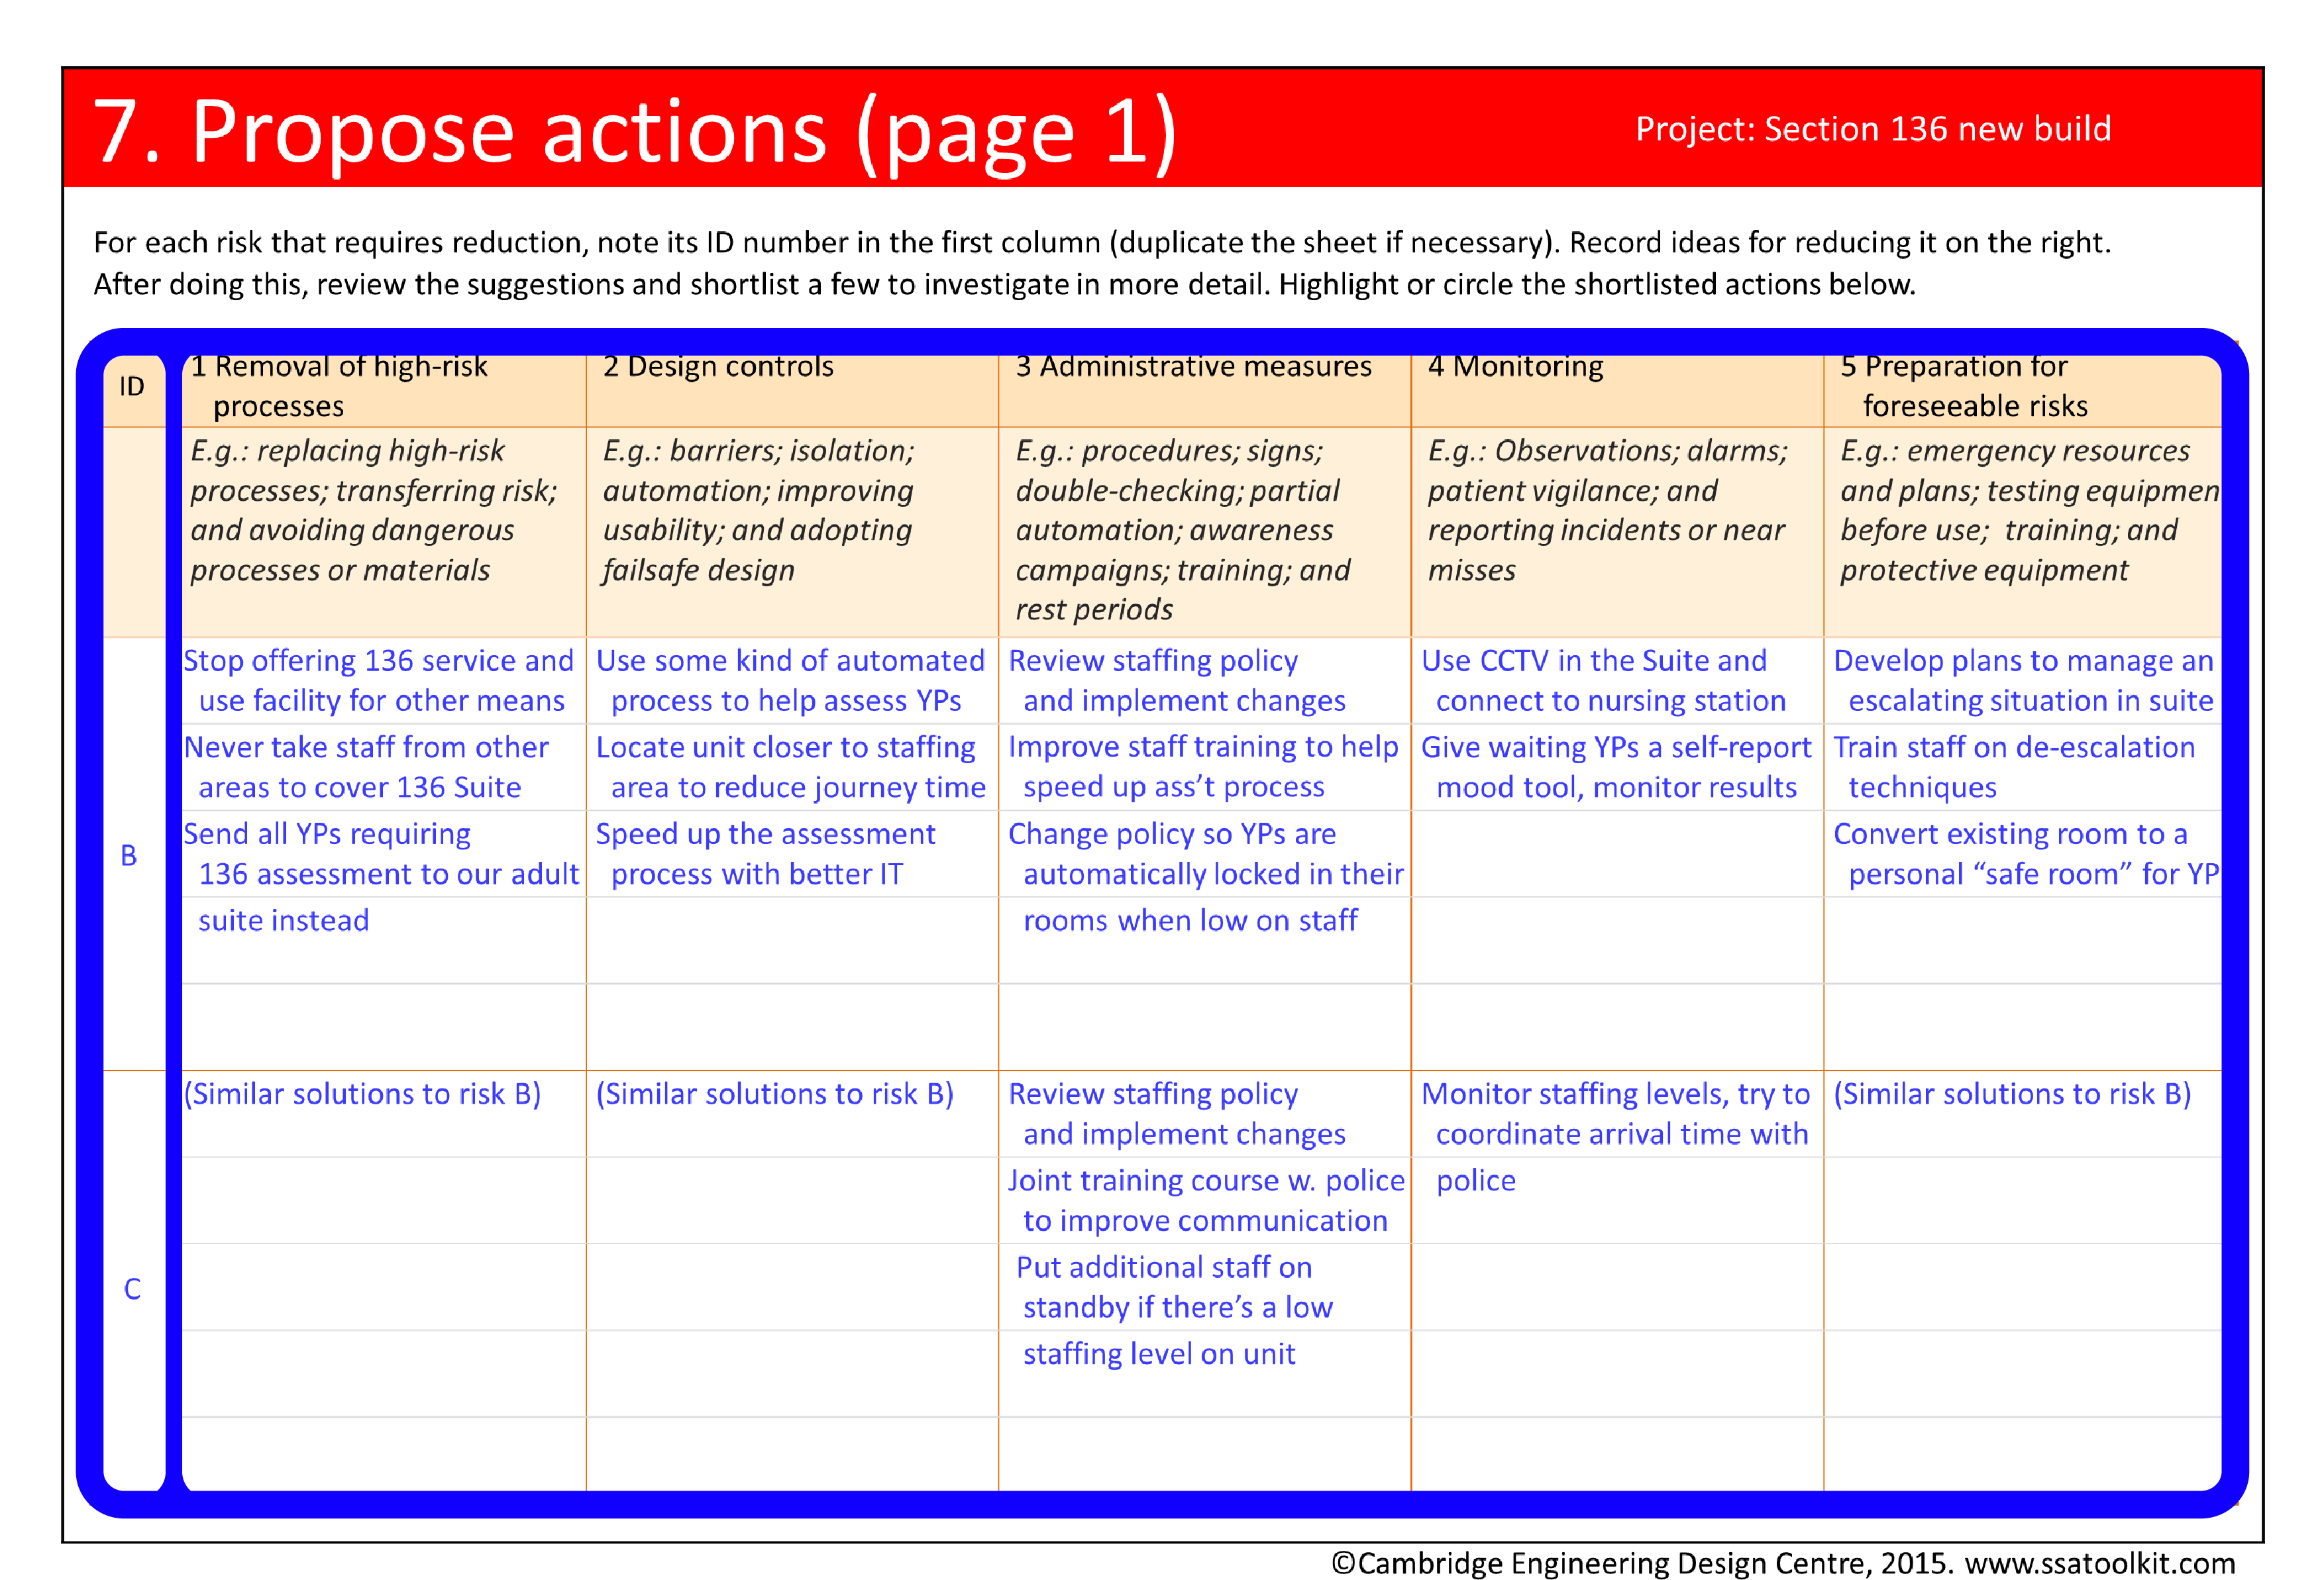 Screenshot of part of the Propose actions page from the Section 136 case study. Possible measures for reducing the risks are listed in five columns corresponding to different types of measures. The columns are: Removal of high-risk processes, Design controls, Administrative measures, Monitoring and Preparation for foreseeable risks. Measures listed under Removal of high-risk processes include stop offering the 136 service and use the facility for other means, and never take staff from other areas to cover 136 Suite. Measures listed under Design controls include using an automated process to help assess young people, and locating the unit closer to the staffing area to reduce journey time. Measures listed under Administrative measures include reviewing staffing policy and implementing changes, and improving staff training to help speed up the assessment process. Monitoring measures include using CCTV in the Suite and connecting it to the nursing station. Measures under Preparation for foreseeable risks include developing plans to manage an escalating situation, and training staff on de-escalation techniques. The full assessment form in pdf is available from the Resources page.